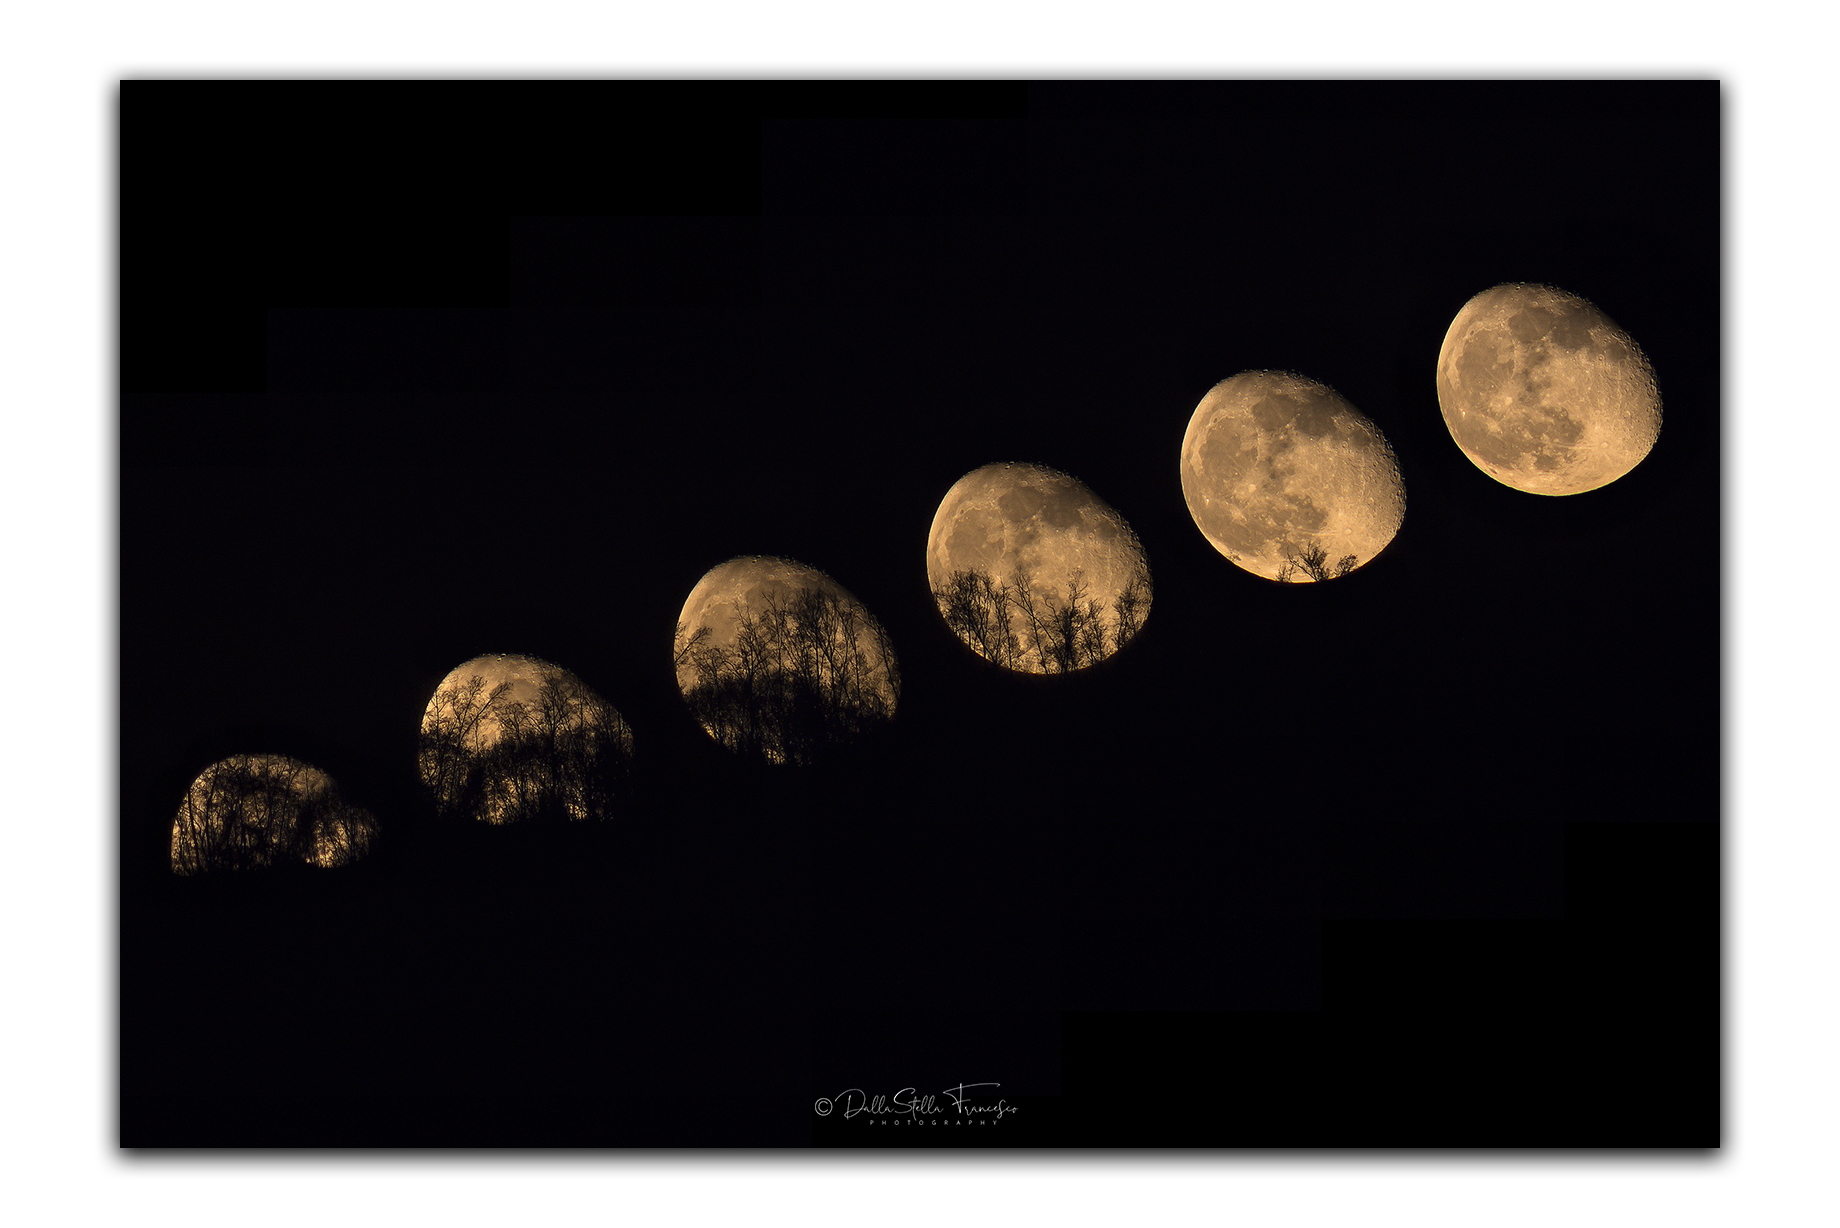 The Moon in sequence...